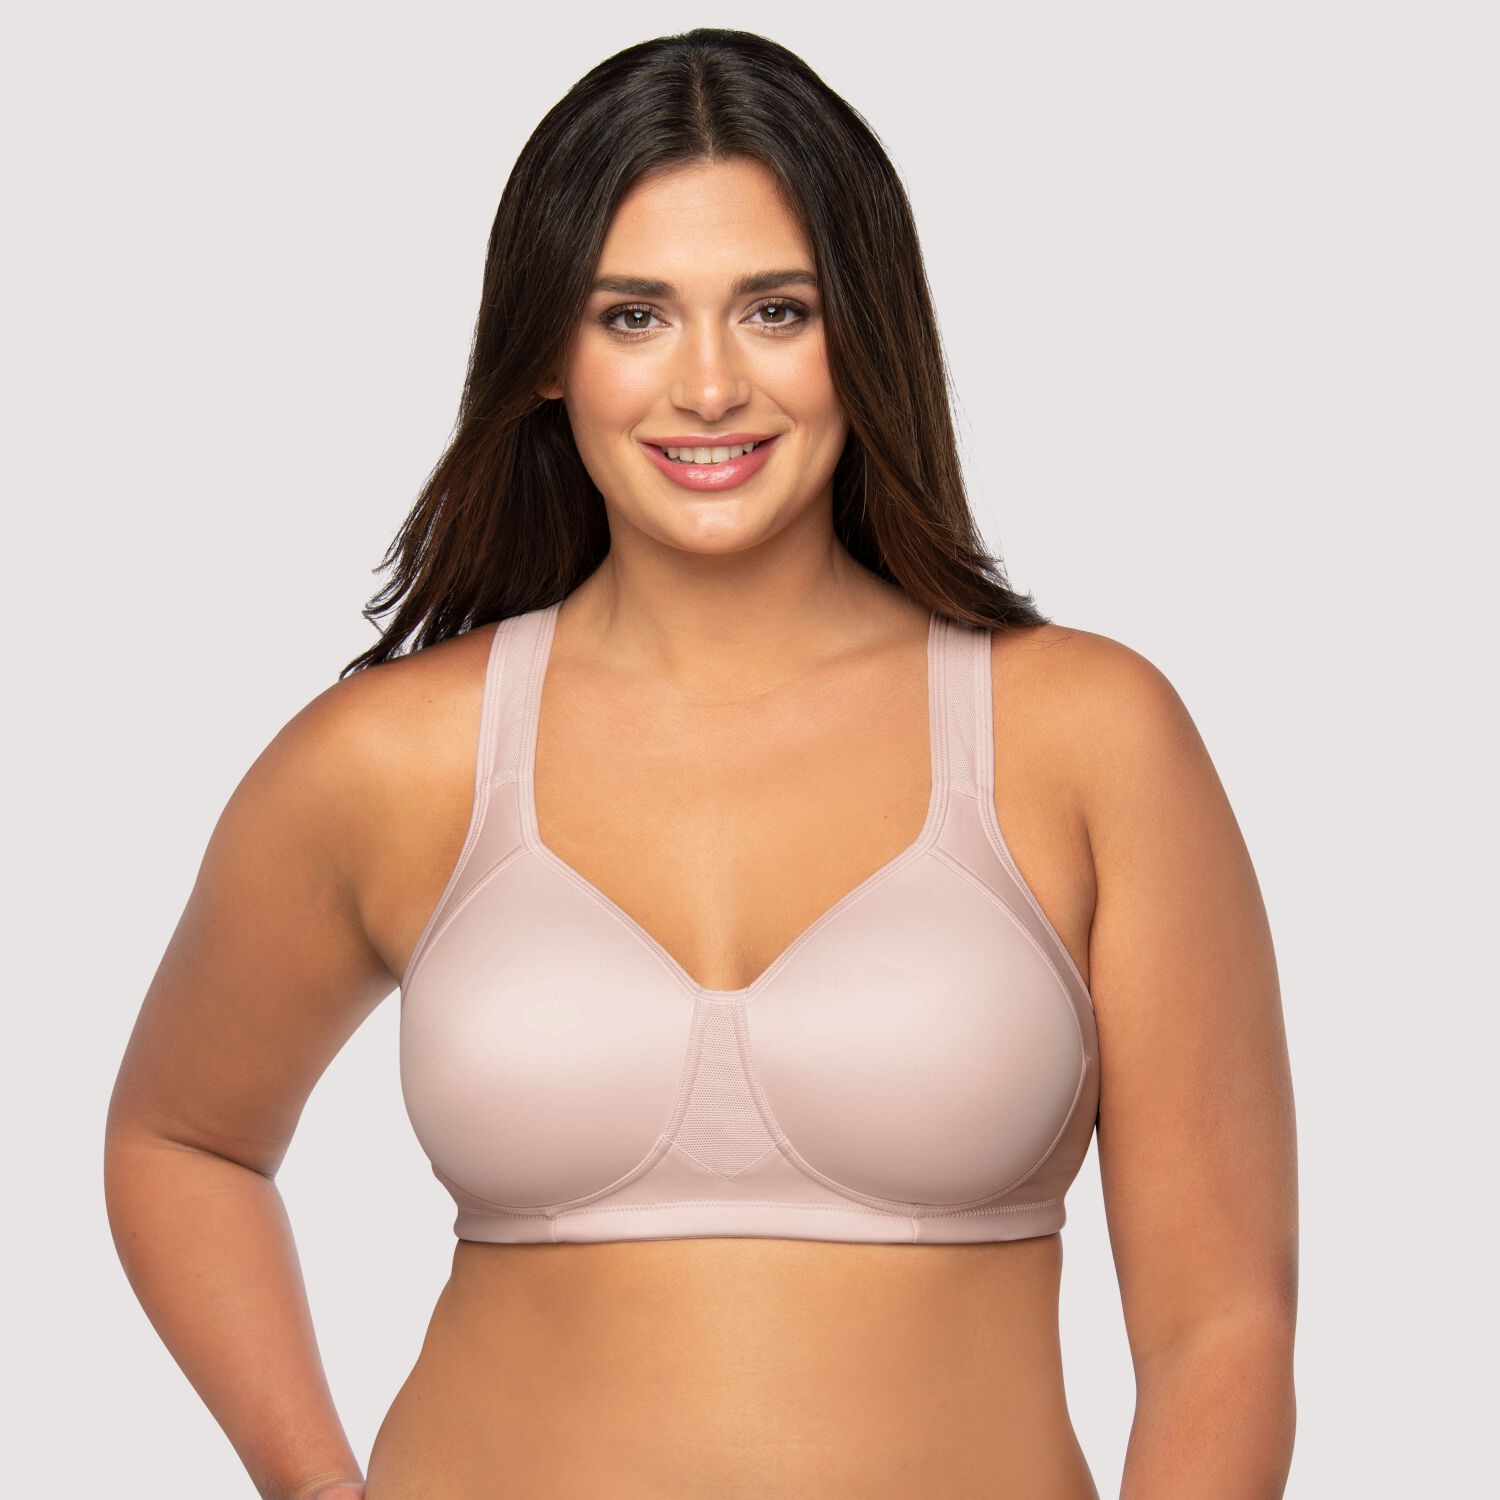 Wireless Bra Vs Underwire Bra: Which One is Right for You